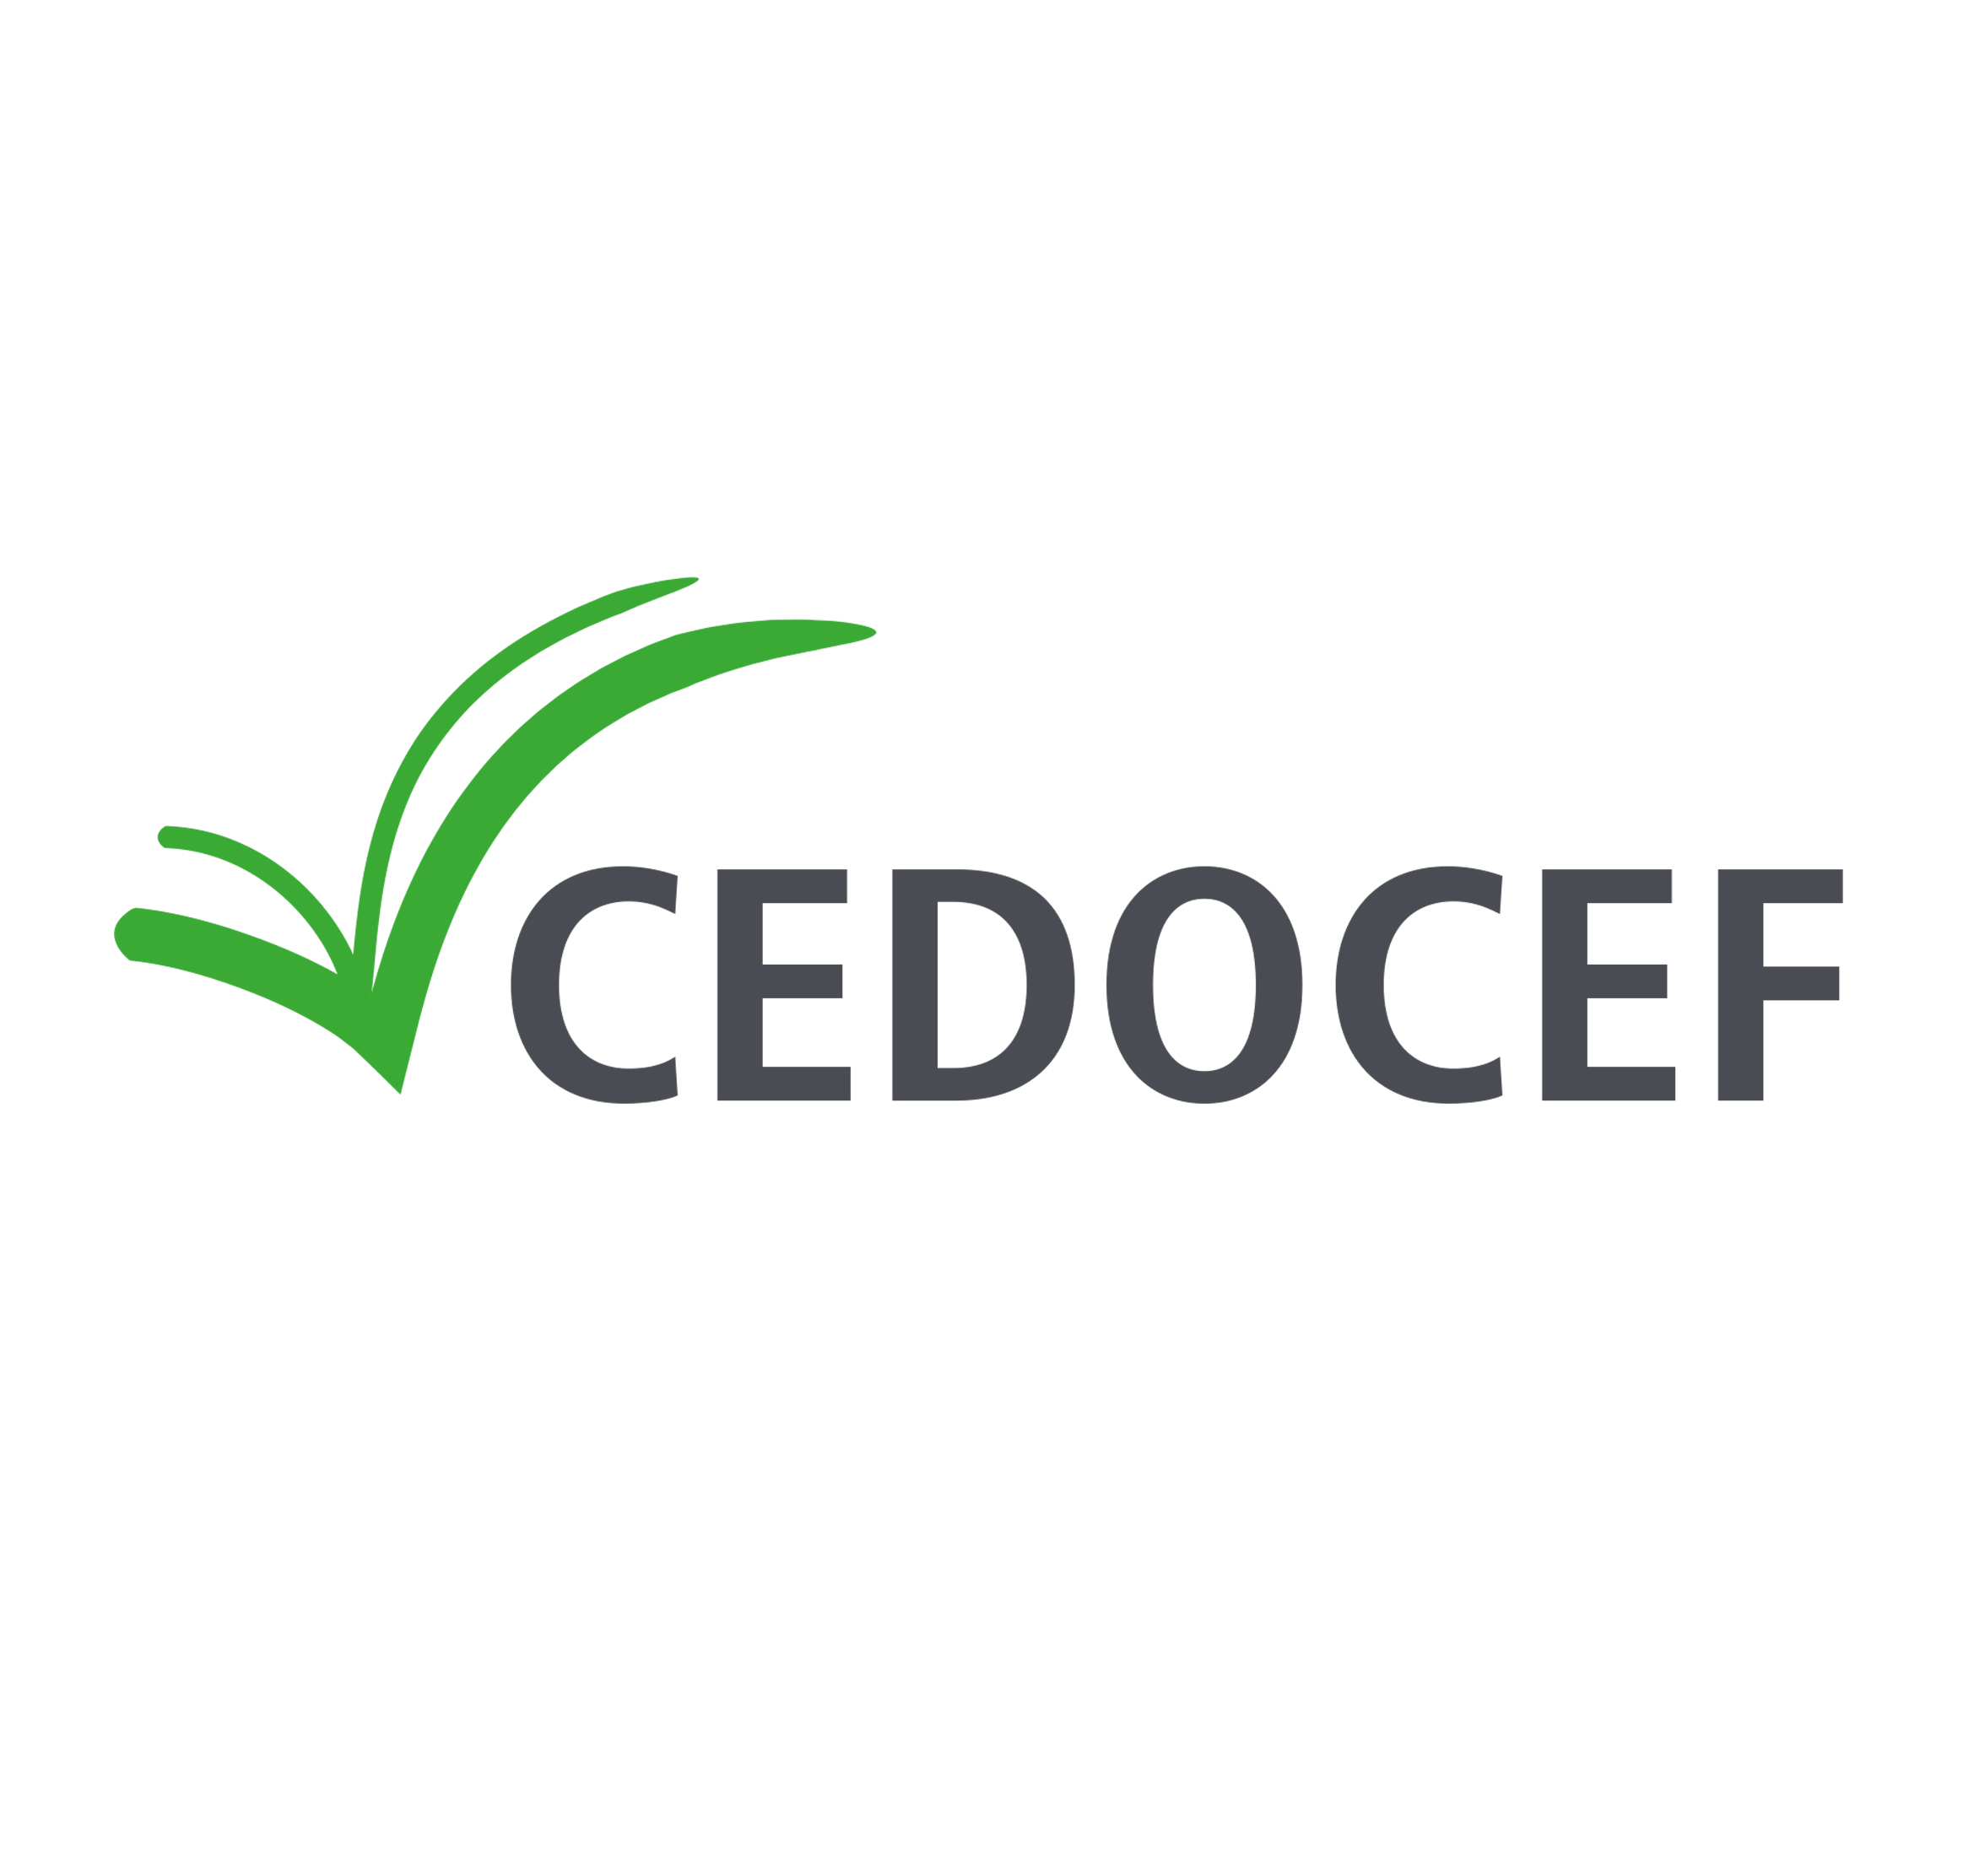 CEDOCEF